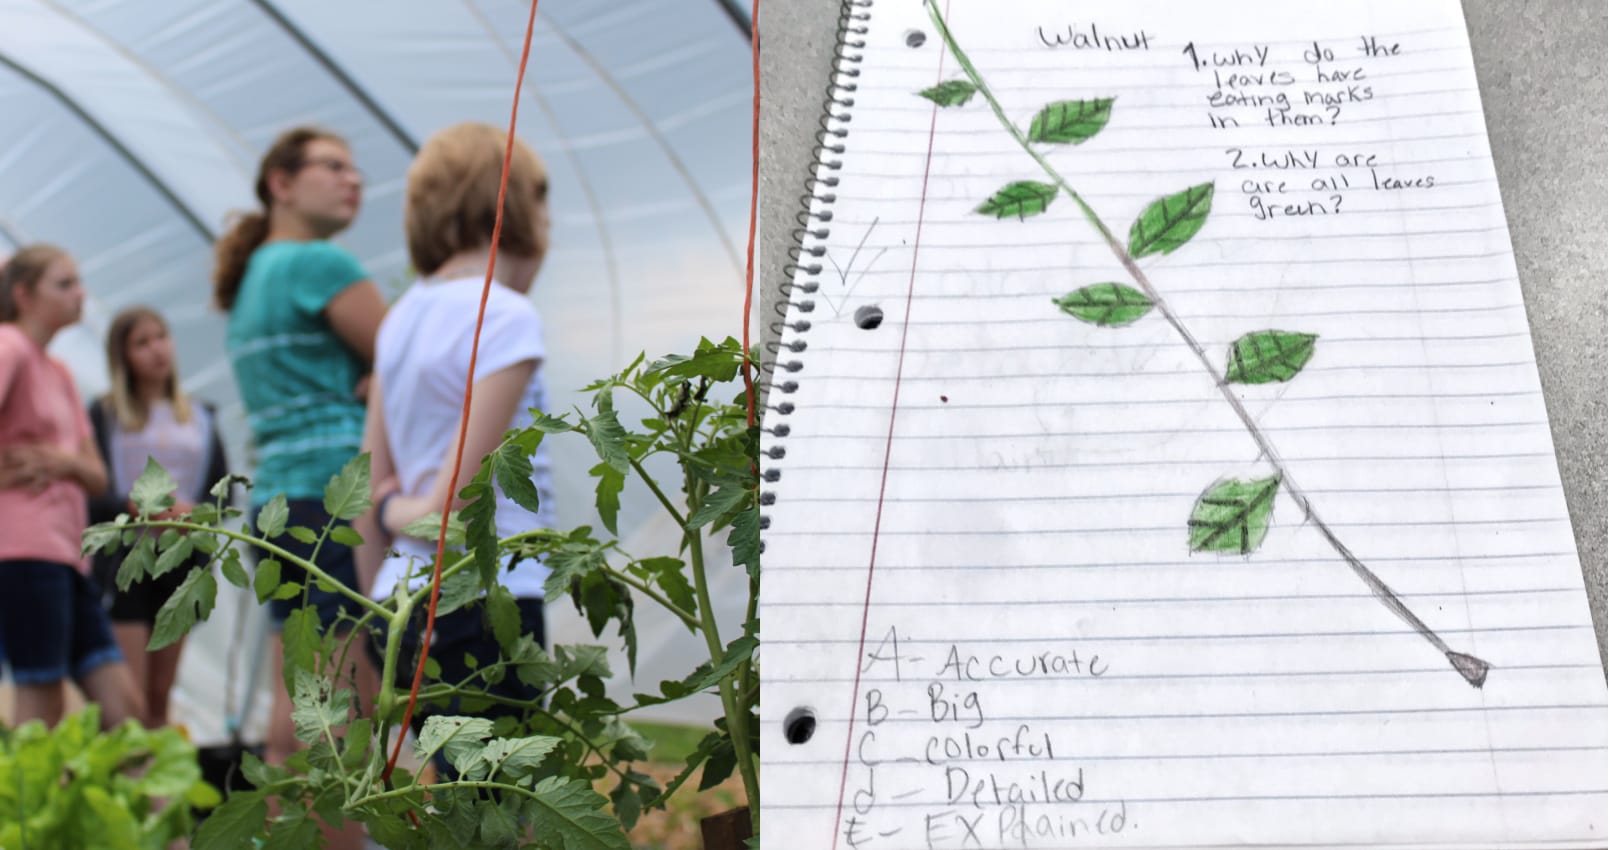 Image collage - one image of girls in a greenhouse looking at plants, another of a notebook with handwritten questions about plants and a drawing of leaves